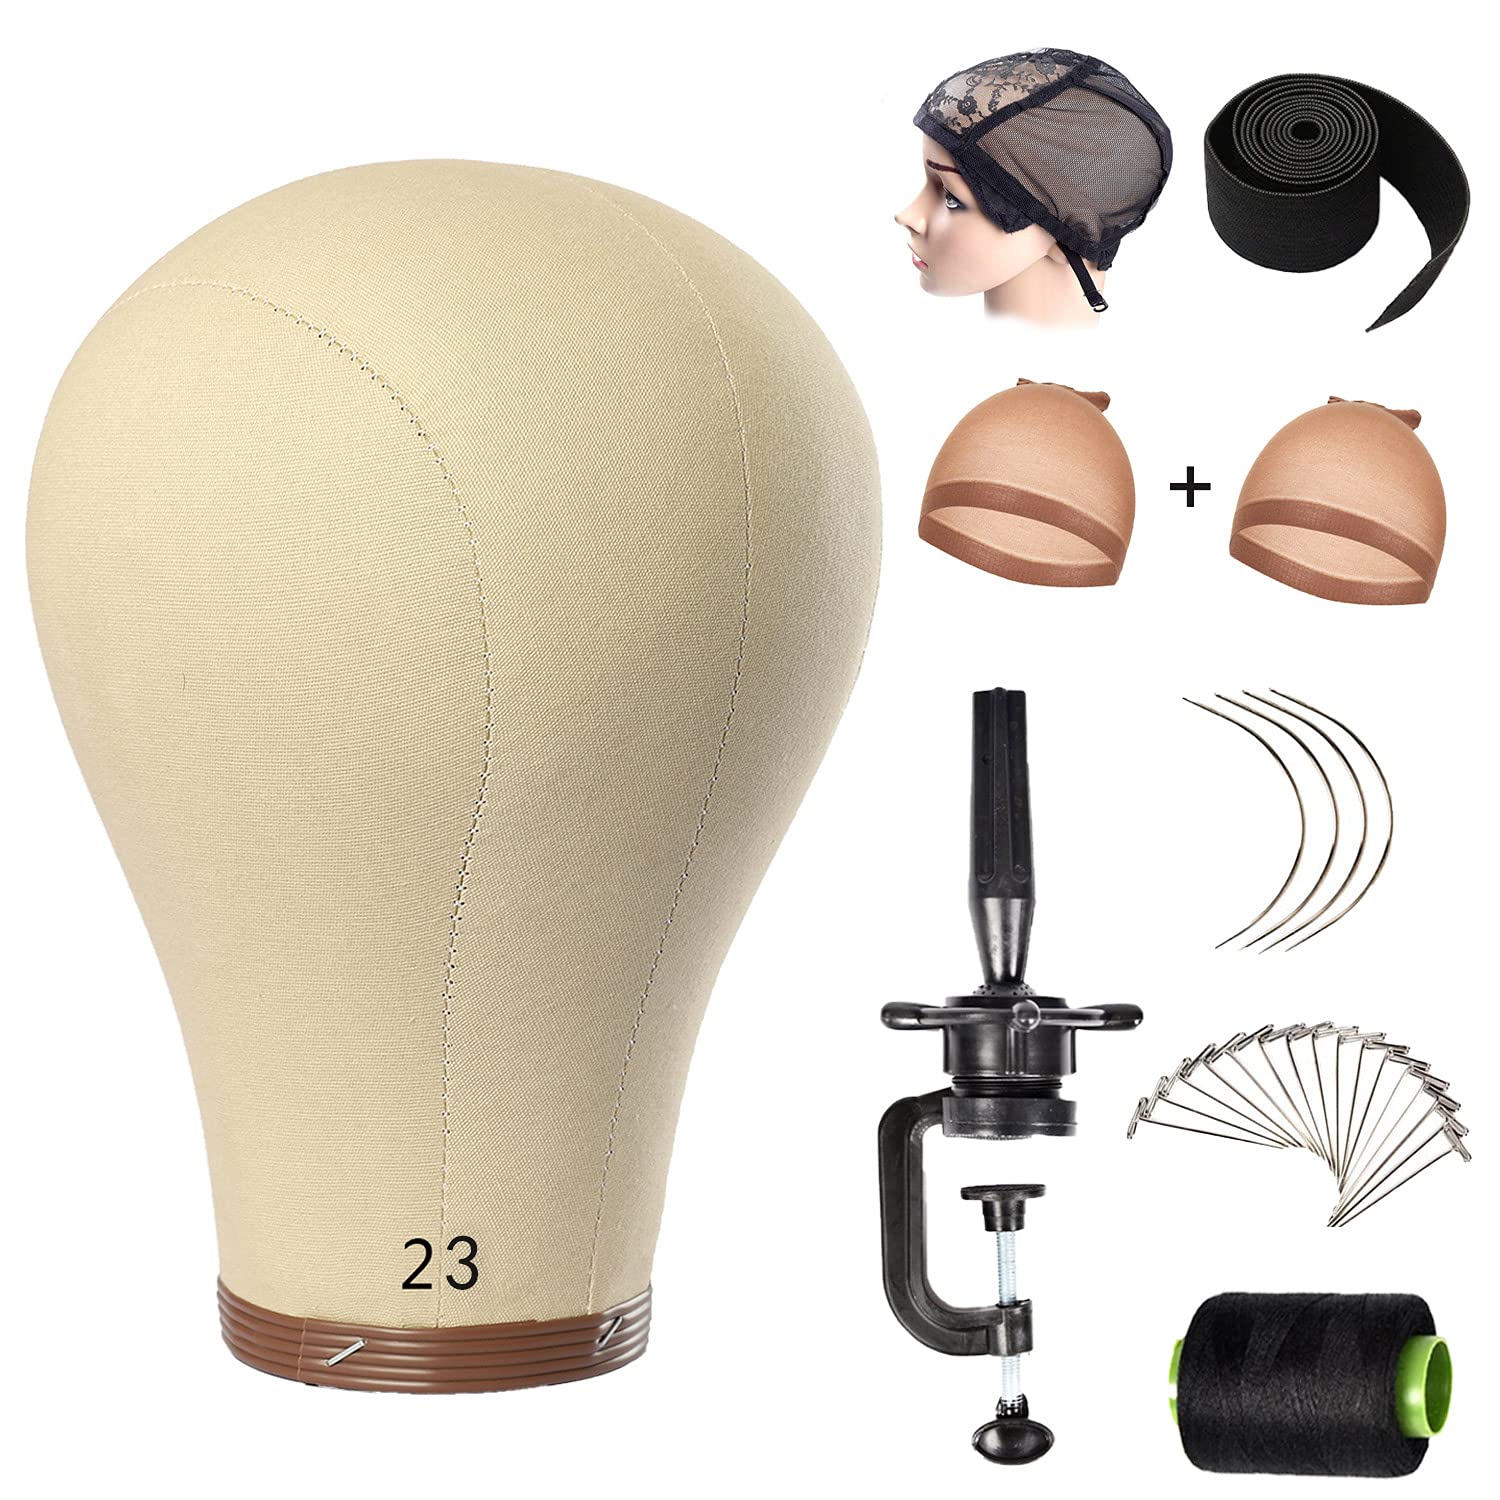 DANSEE 23 inch Wig Head Canvas Block Head Mannequin Head With Stand for  Making Wigs, Wig Head With Stand for Display Wig